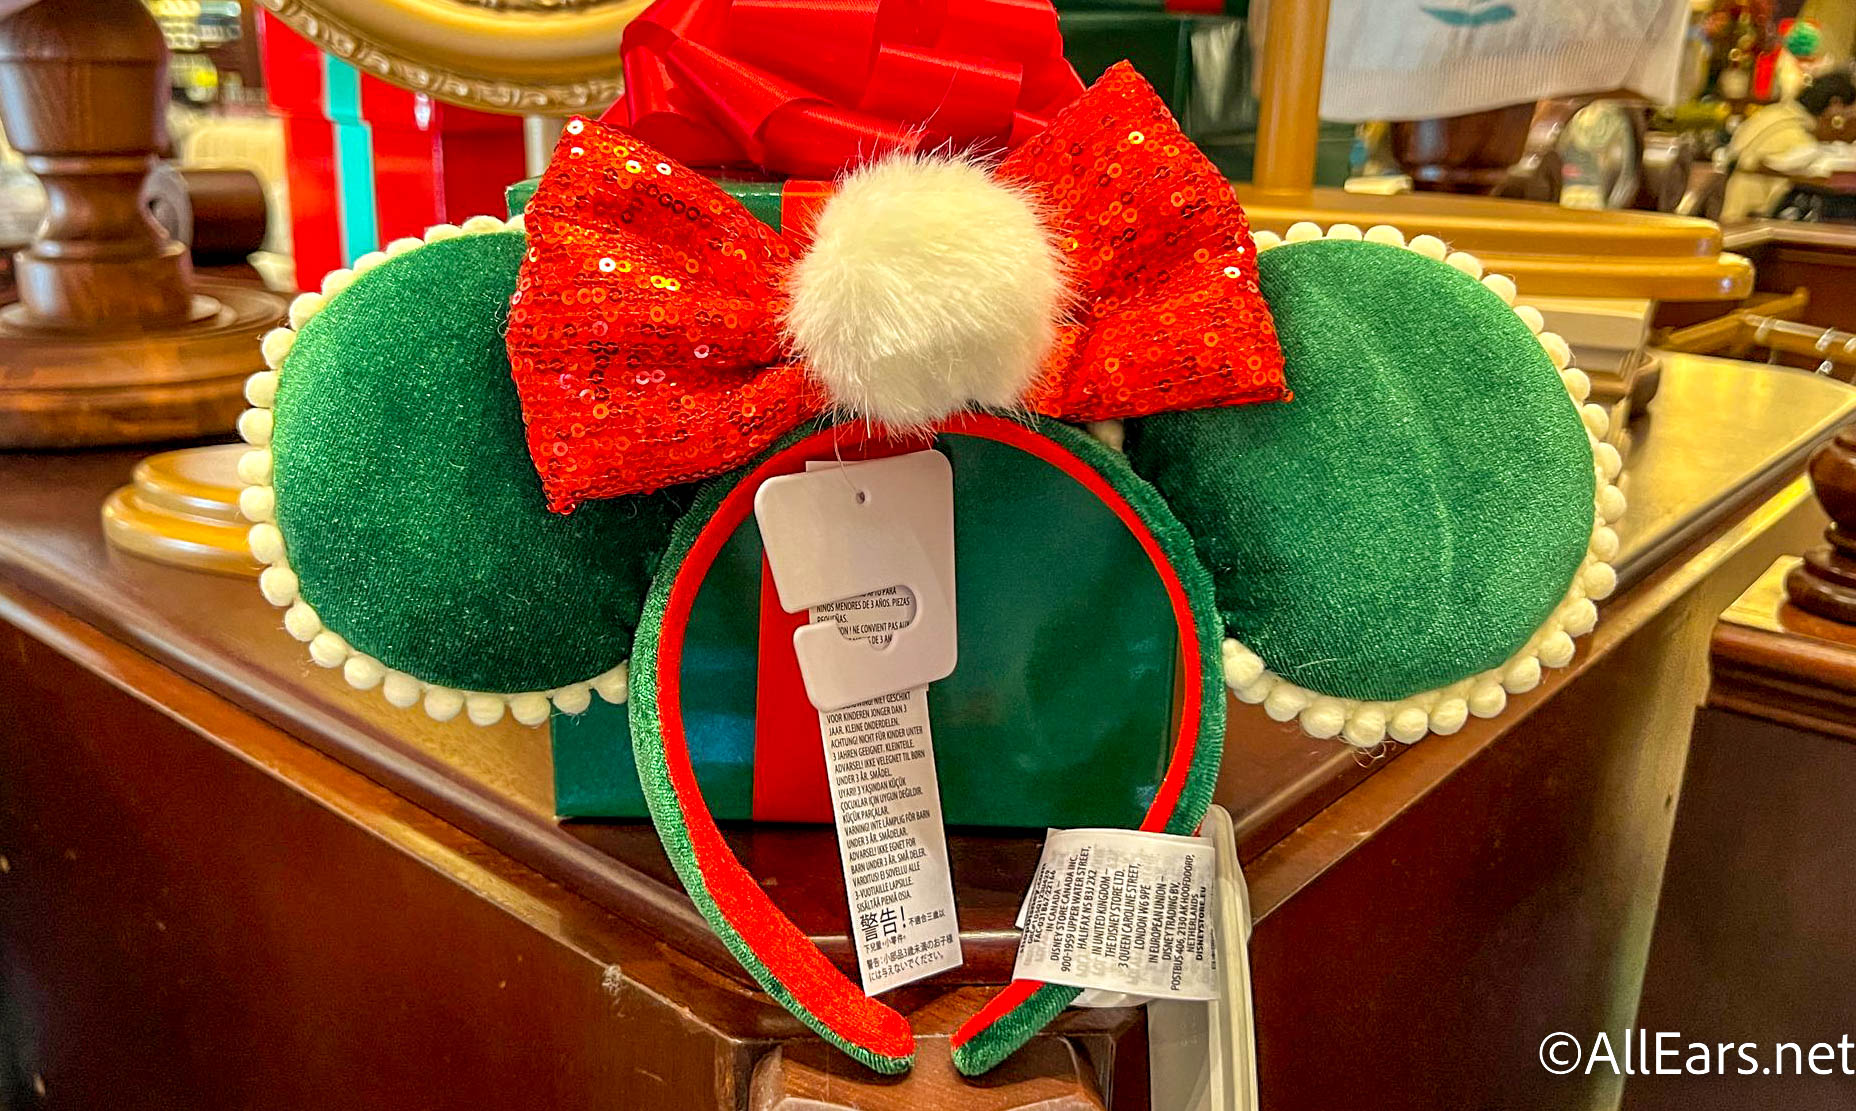 Disney Just Released 5 NEW Pairs of Holiday Ears!